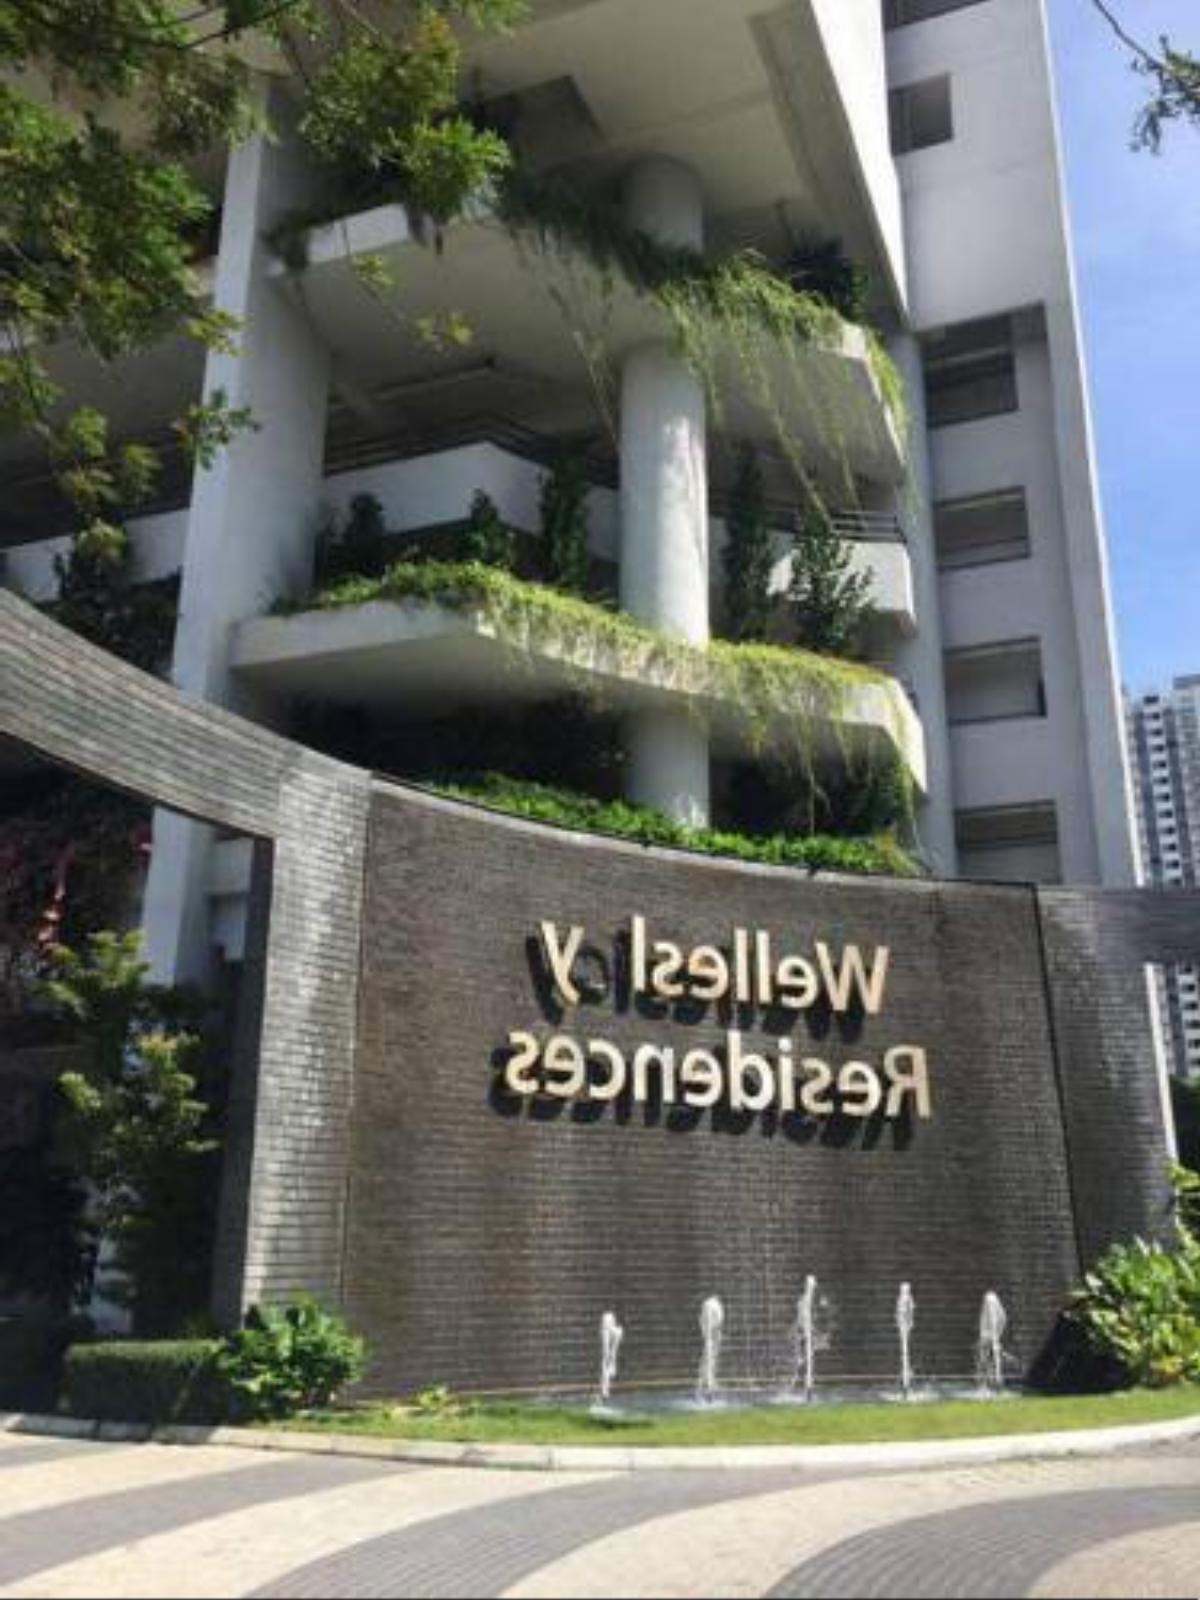 Wellesley Residences Hotel Butterworth Malaysia